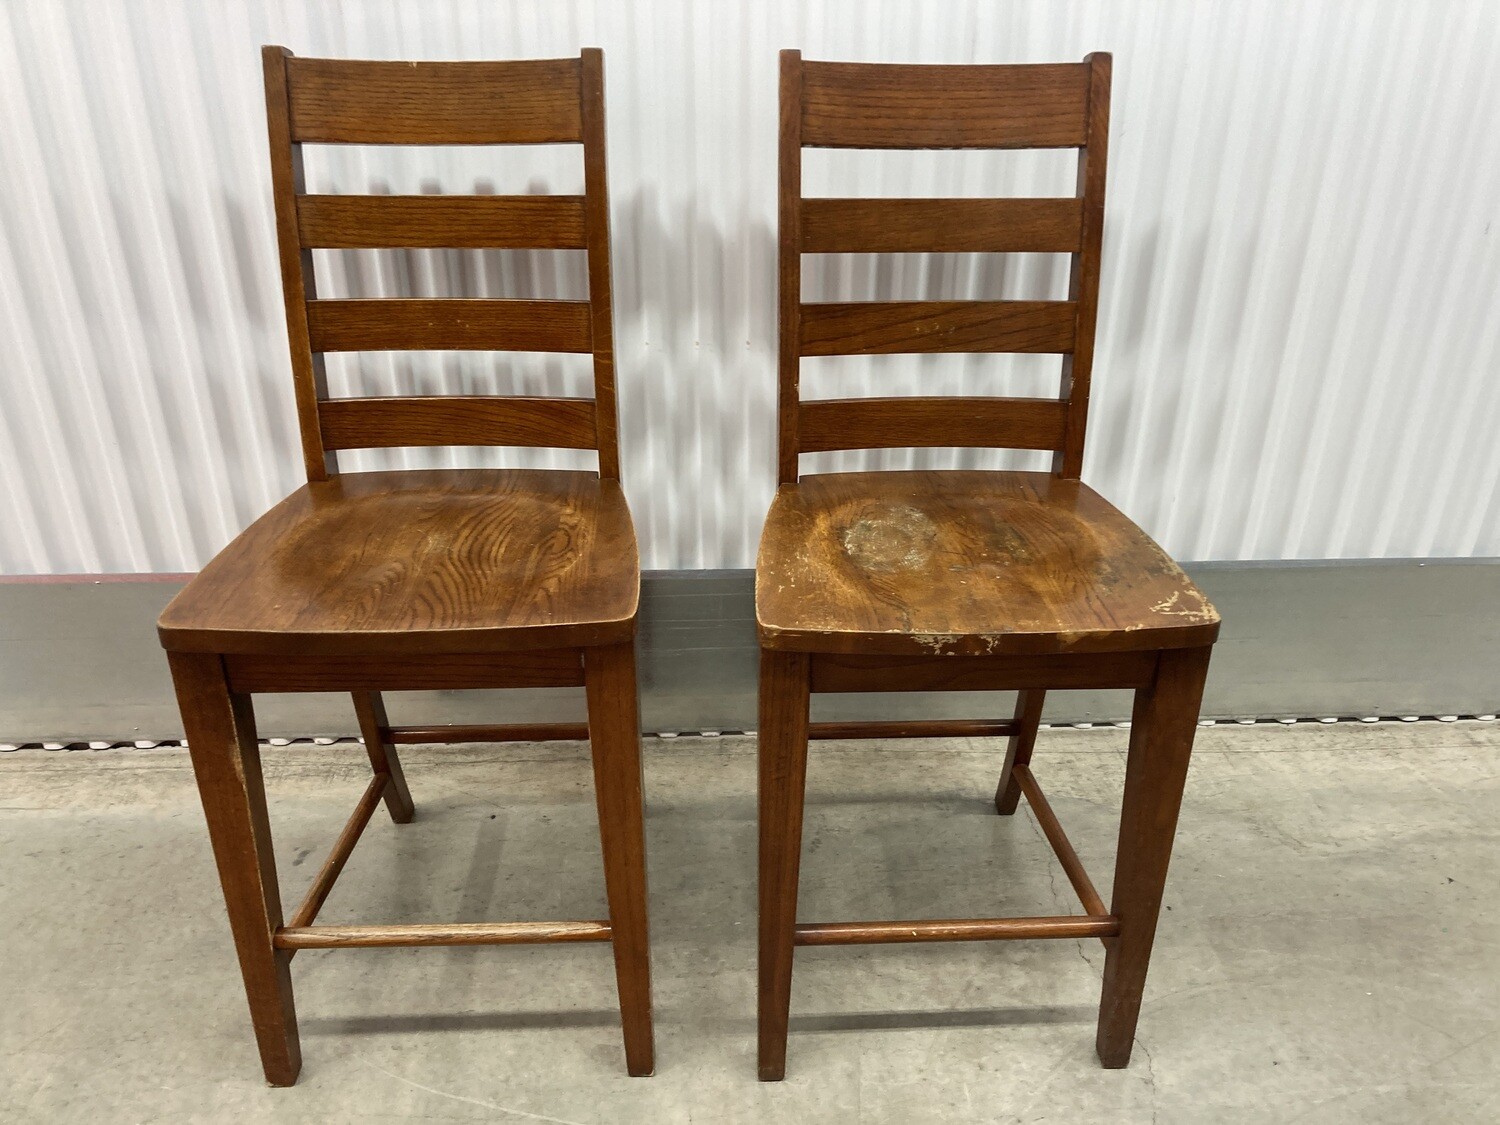 Pair of Bar Stools, one with wear #2009